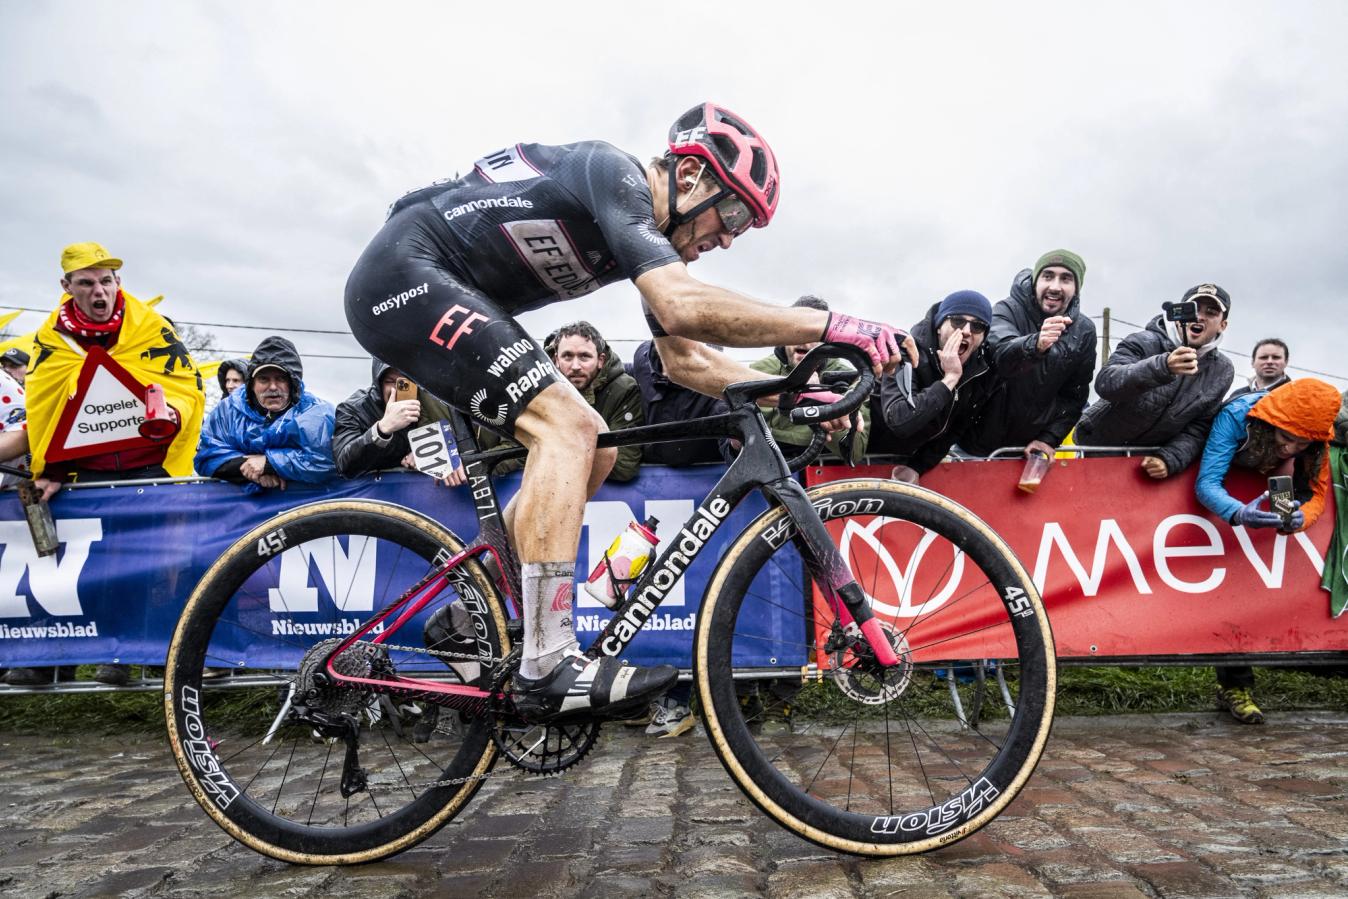 On the comeback trail, Bettiol has plenty of objectives for the remainder of the season, starting with the cobbles of Paris-Roubaix on Sunday